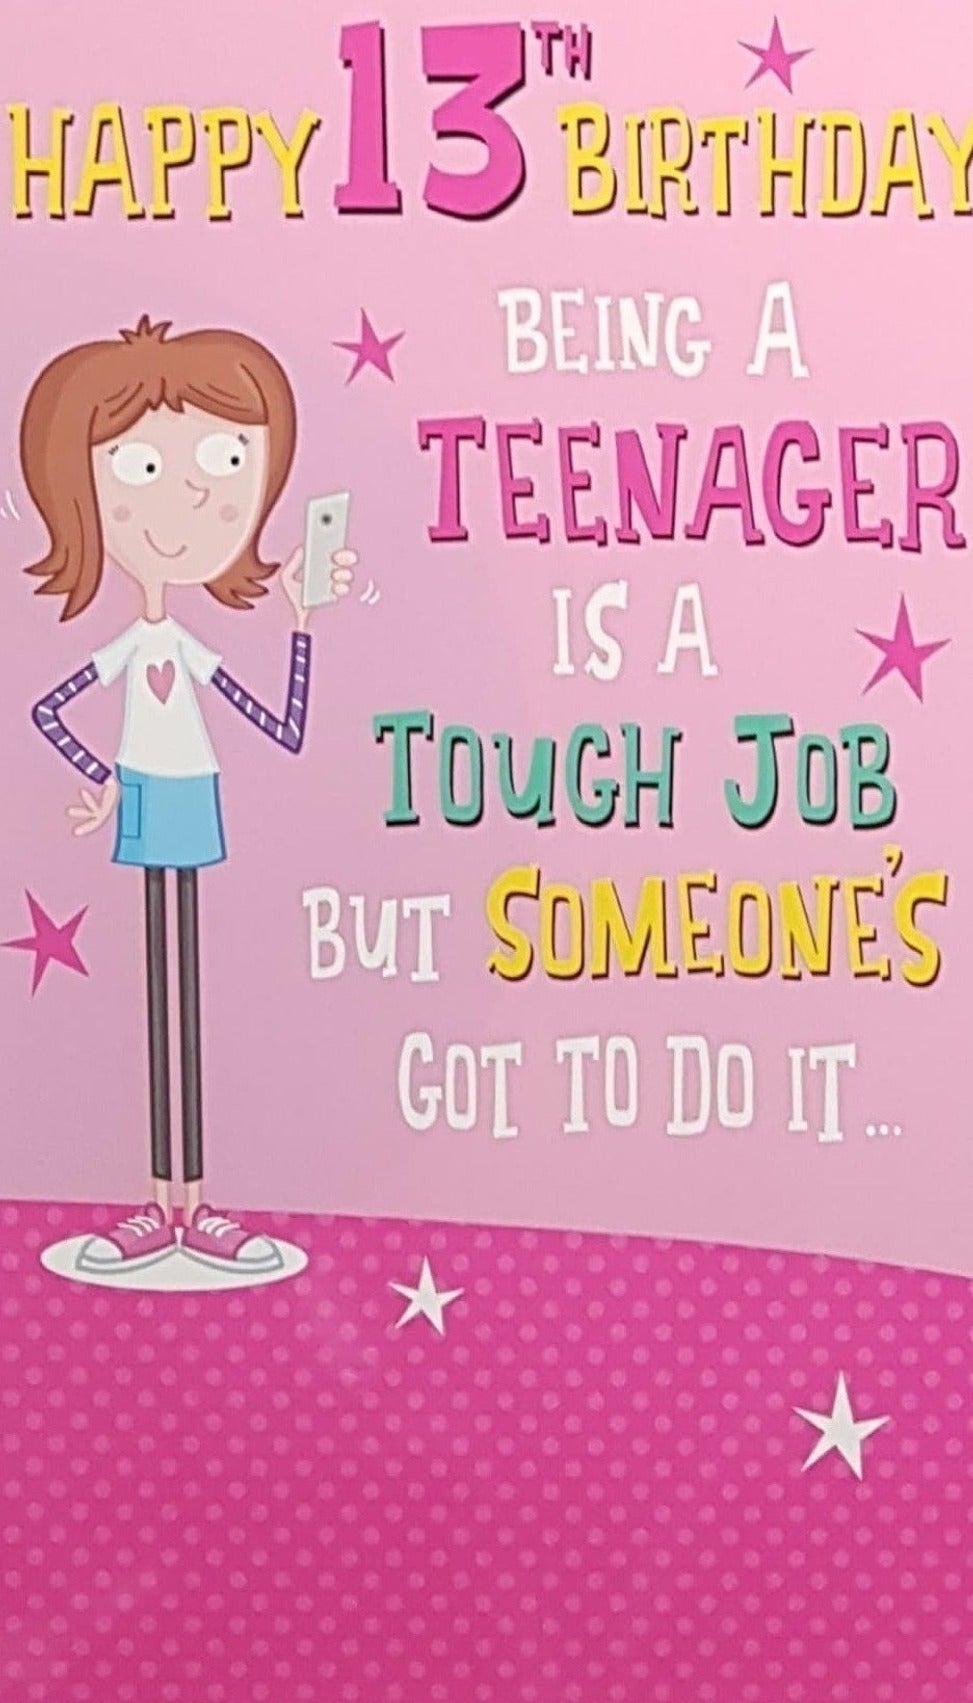 Age 13 Birthday Card - Being A Teenager Is A Tough Job...